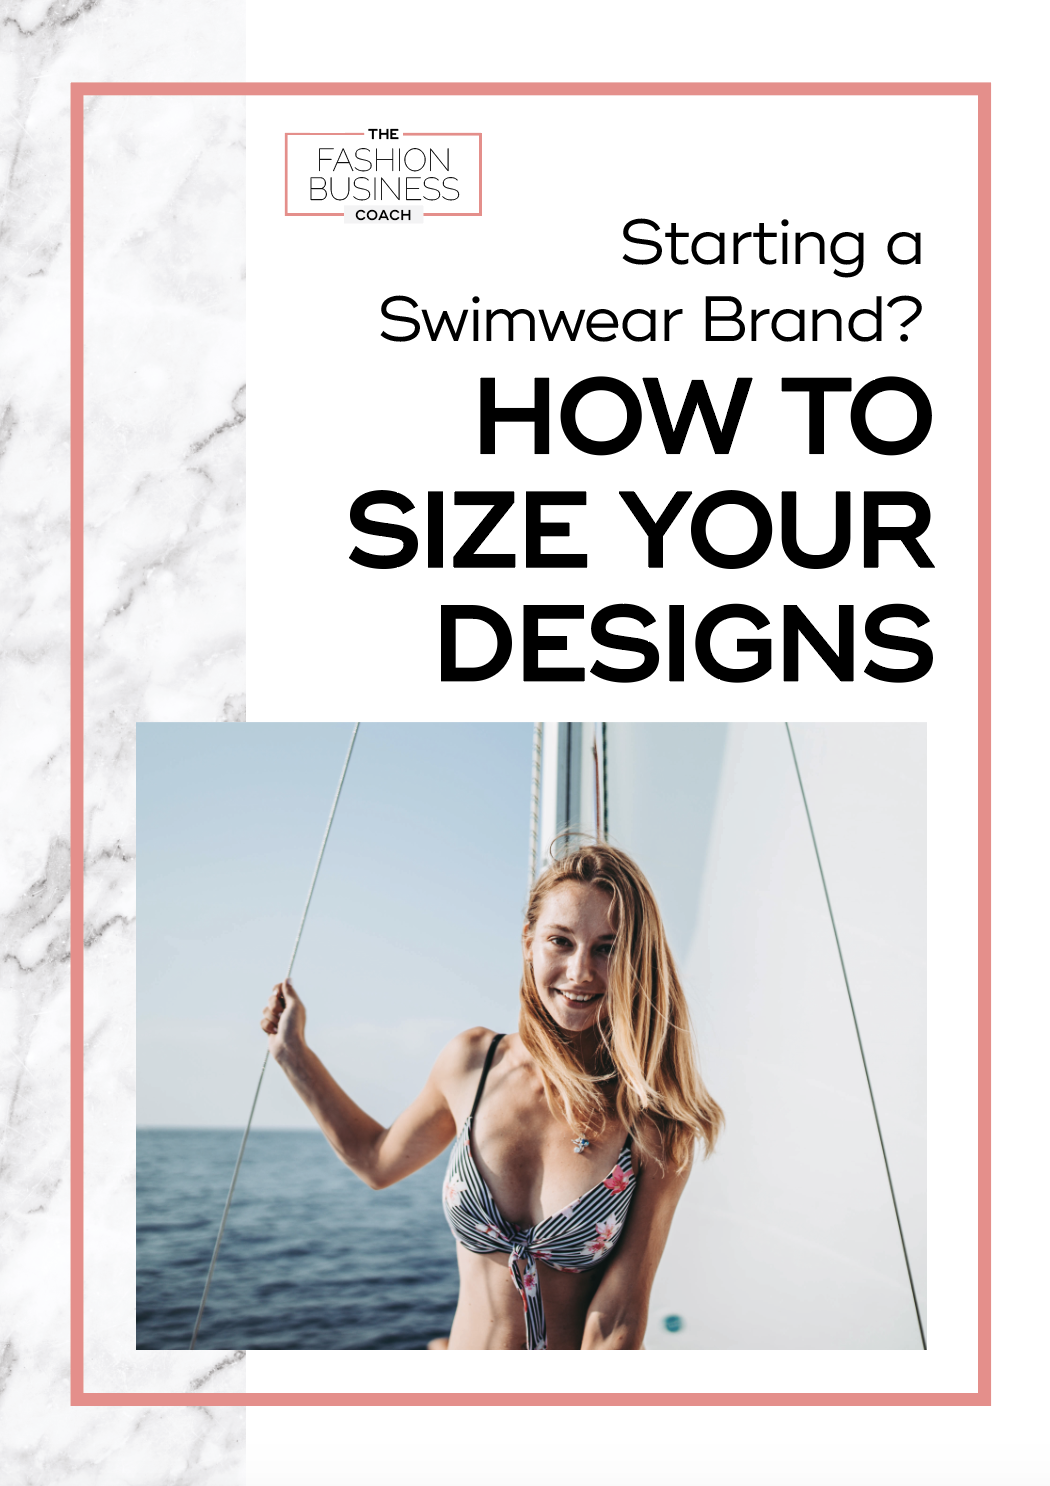 Starting a Swimwear Brand? How to Size Your Designs 1.png